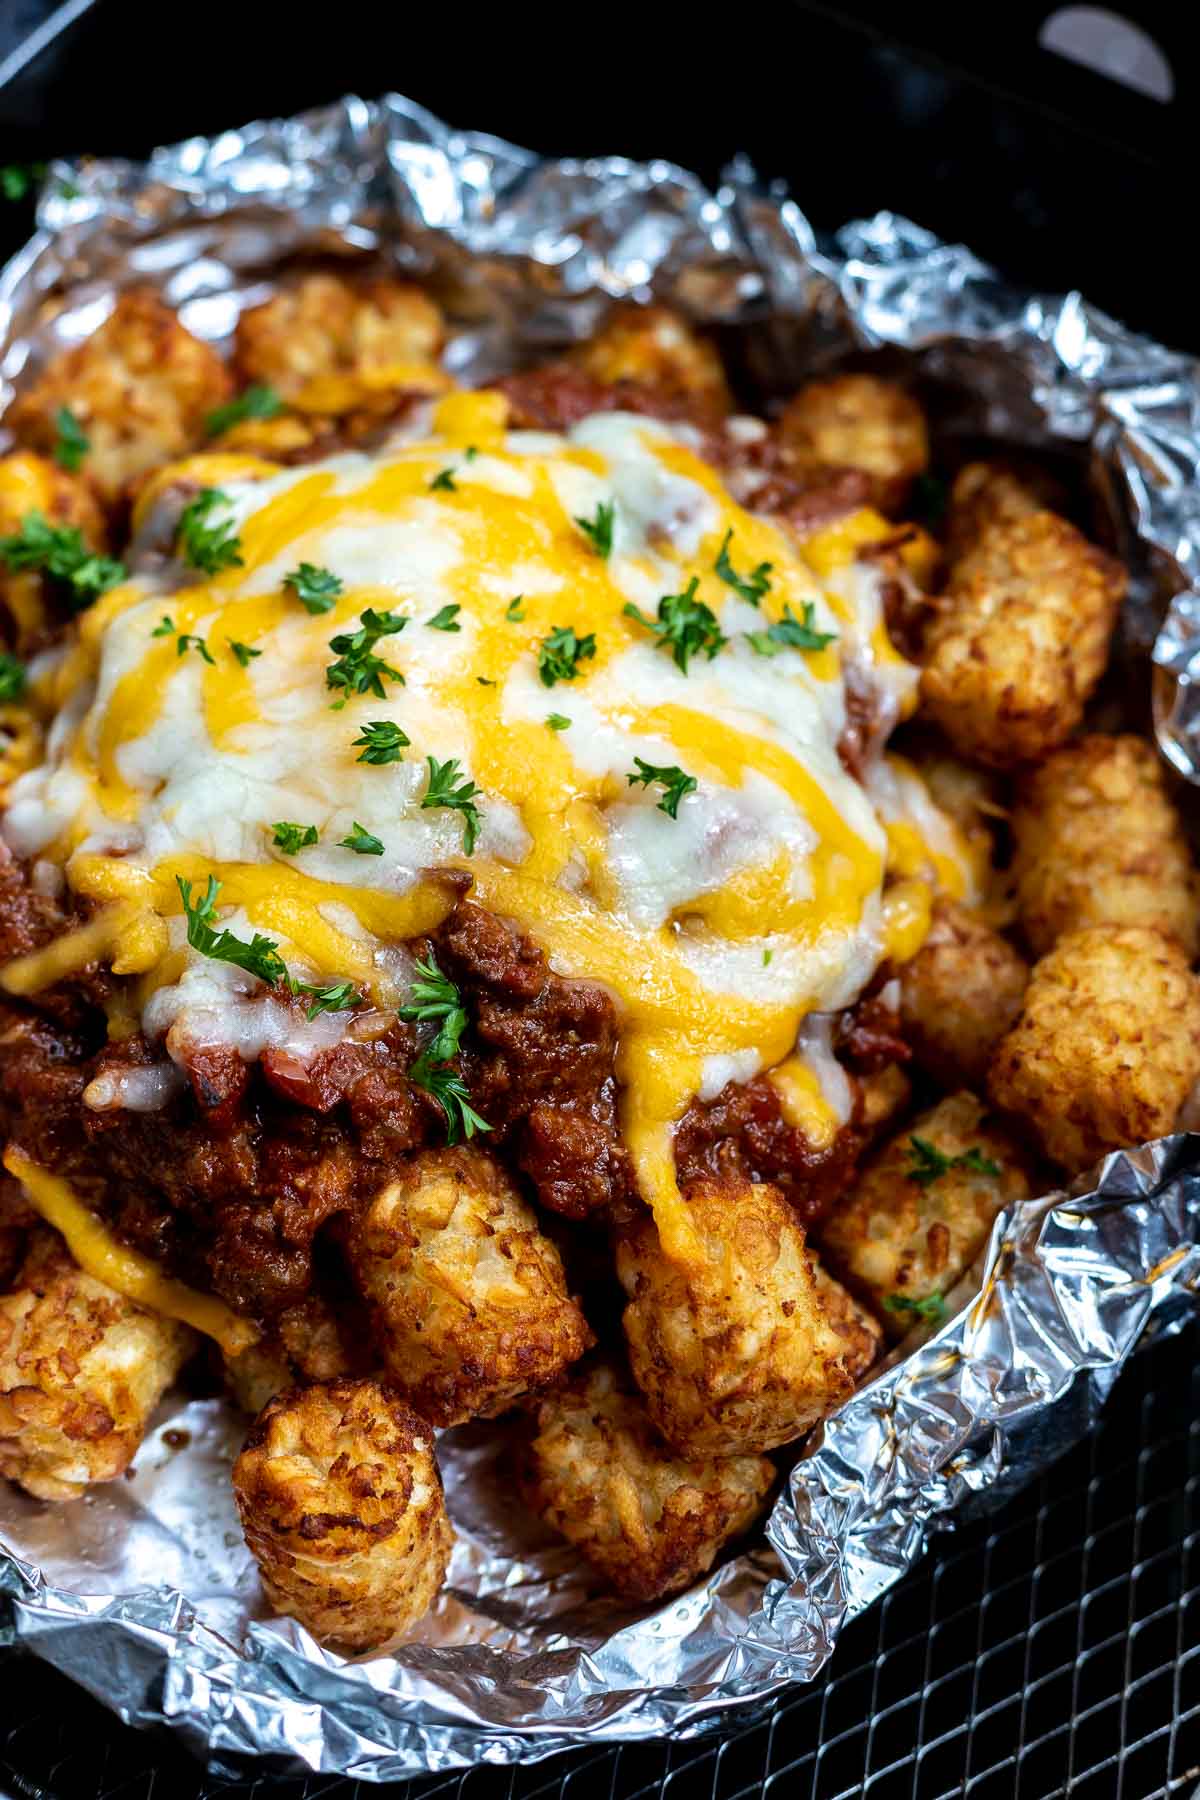 tater tots topped with chili and melted cheese